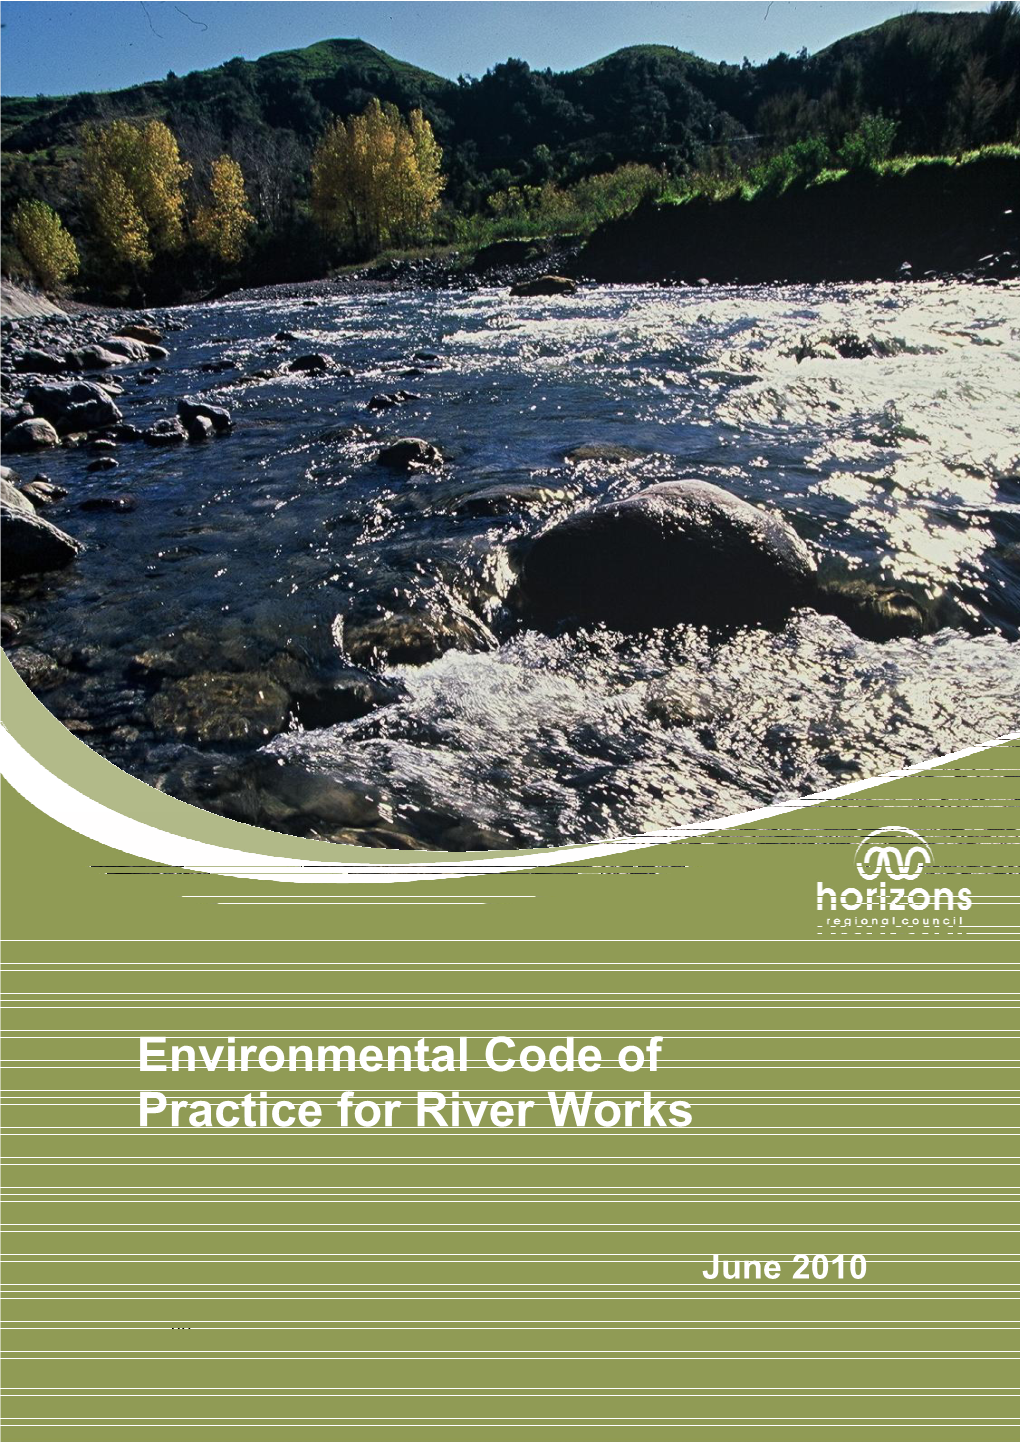 Environmental Code of Practice for River Works